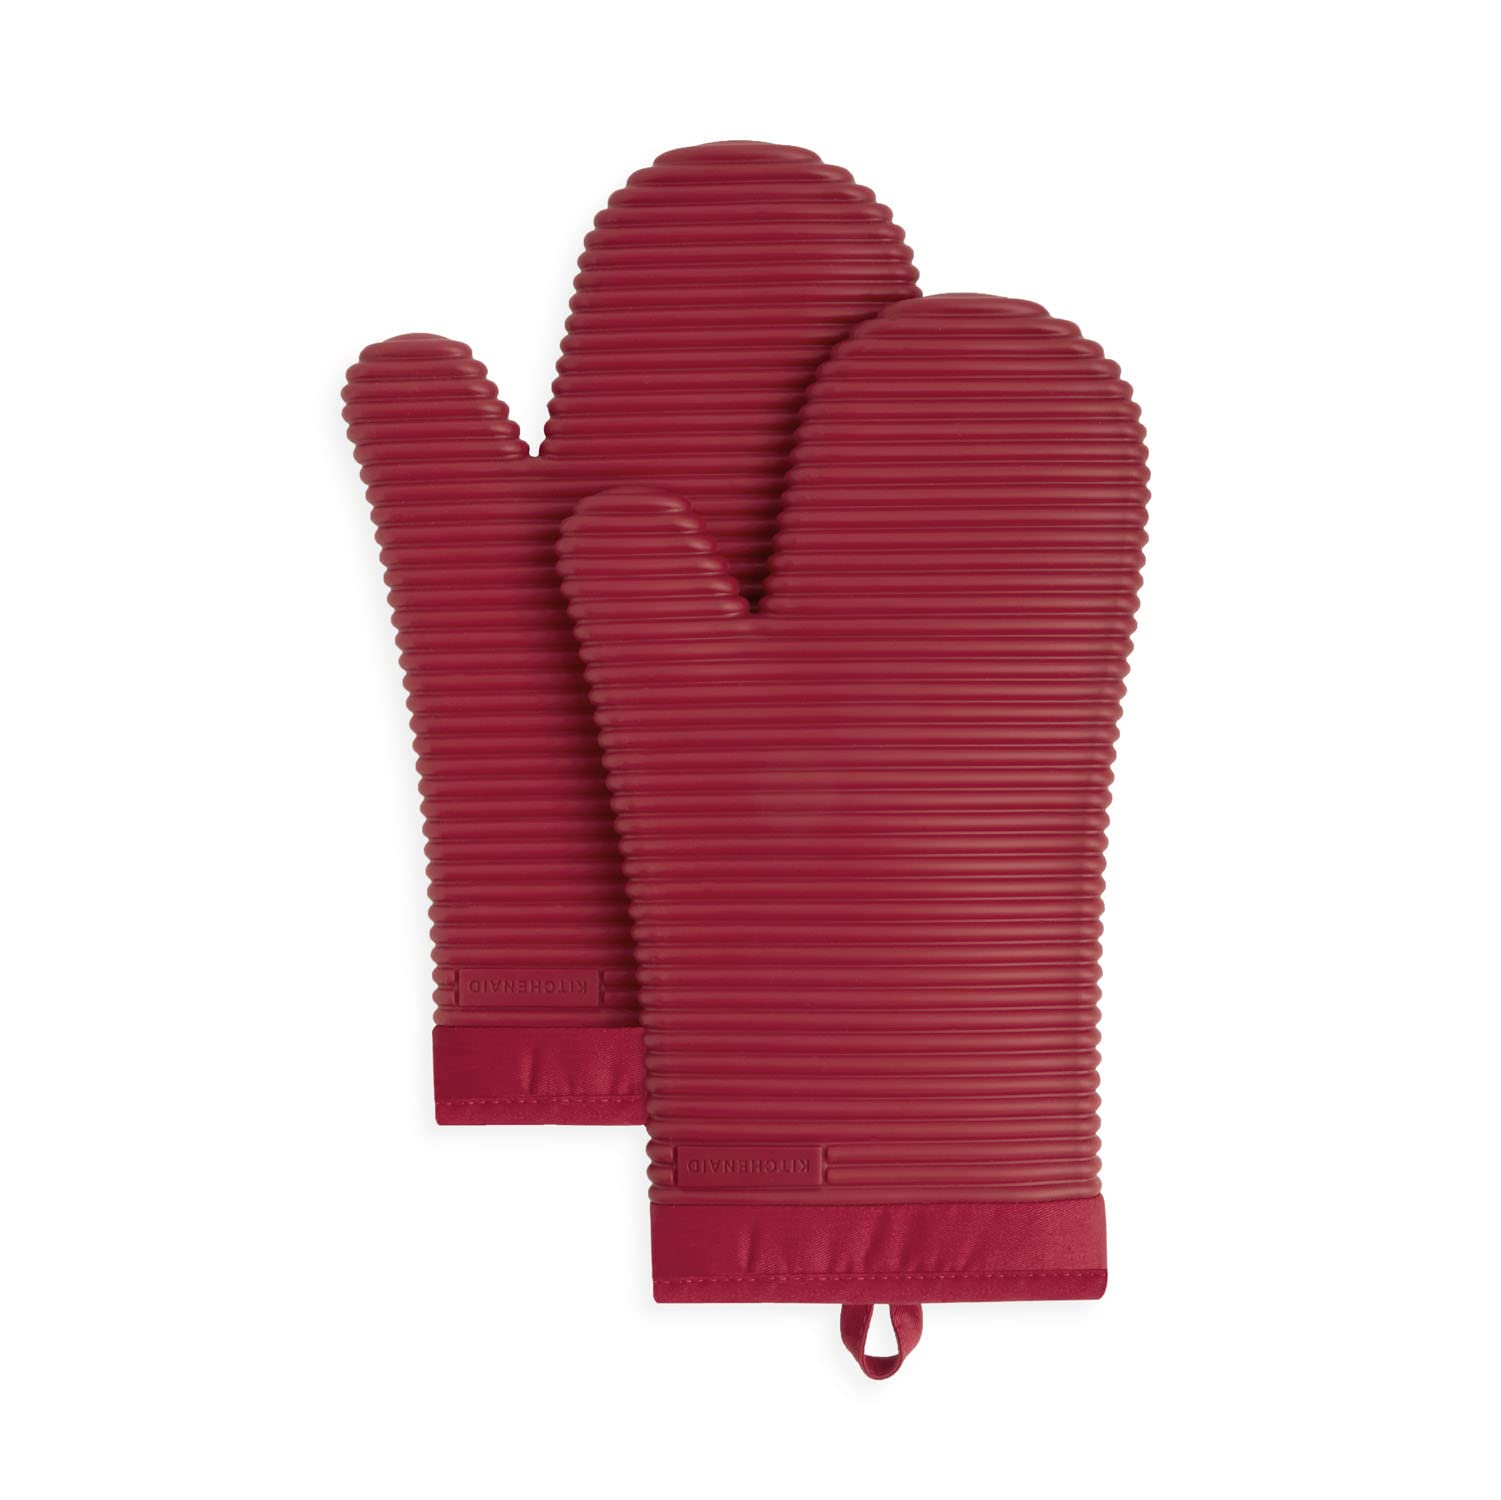 KitchenAid Ribbed Soft Silicone Oven Mitt Set, 7"x13", Passion Red 2 Count $8.55